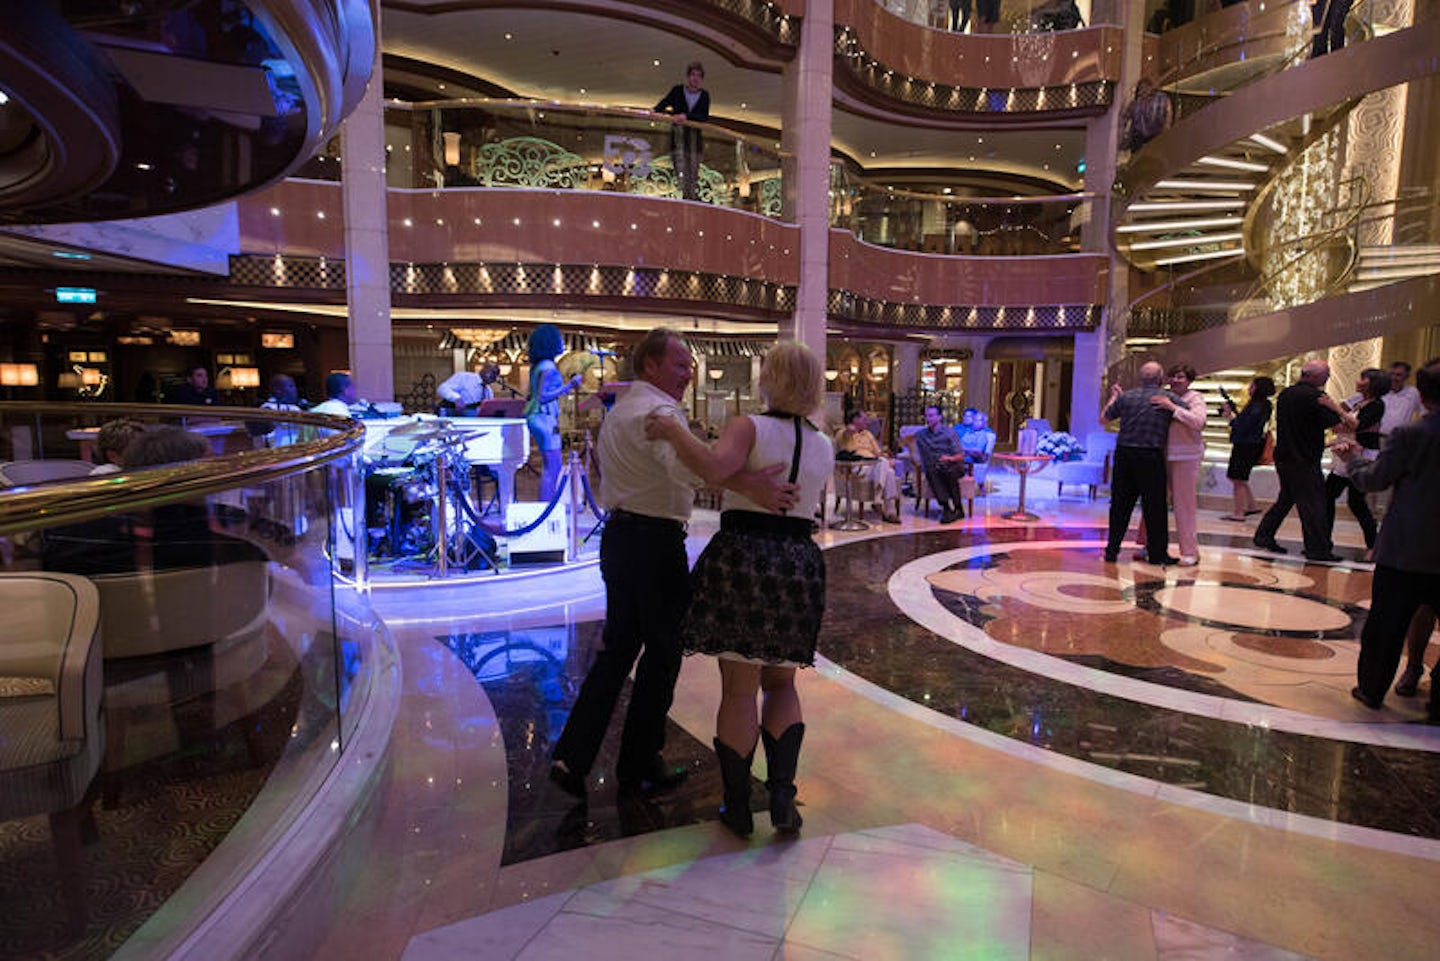 The Piazza on Regal Princess